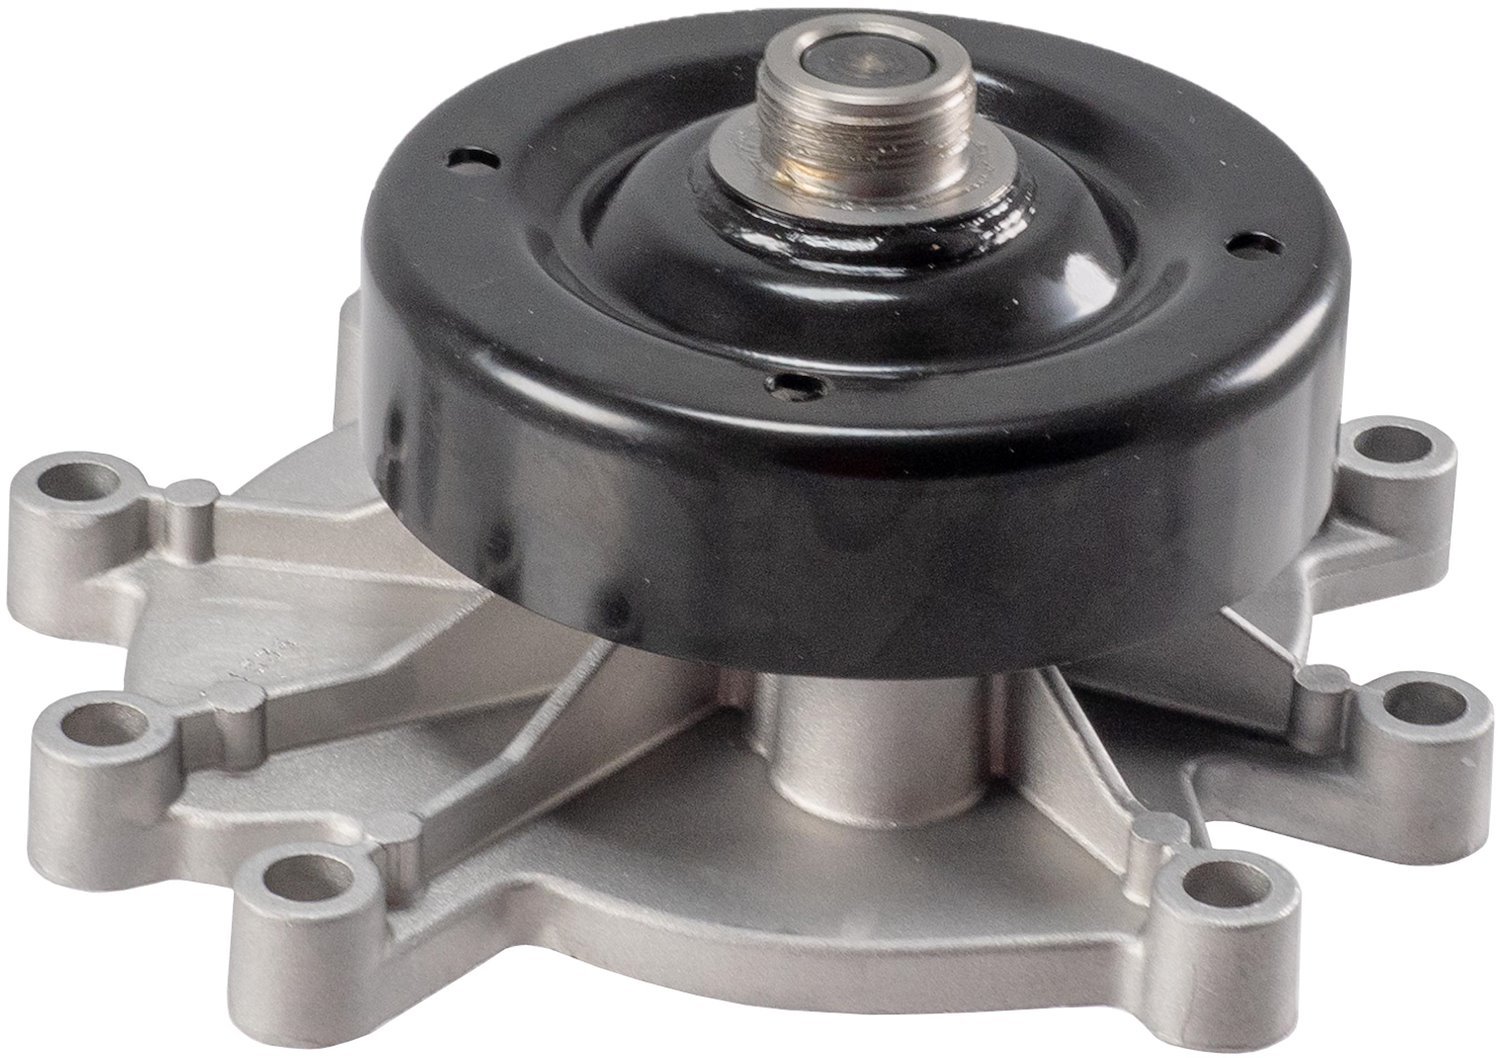 Water Pump Fits Select 2000-2013 Dodge, Chrysler, Jeep 3.7/4.7L Engines